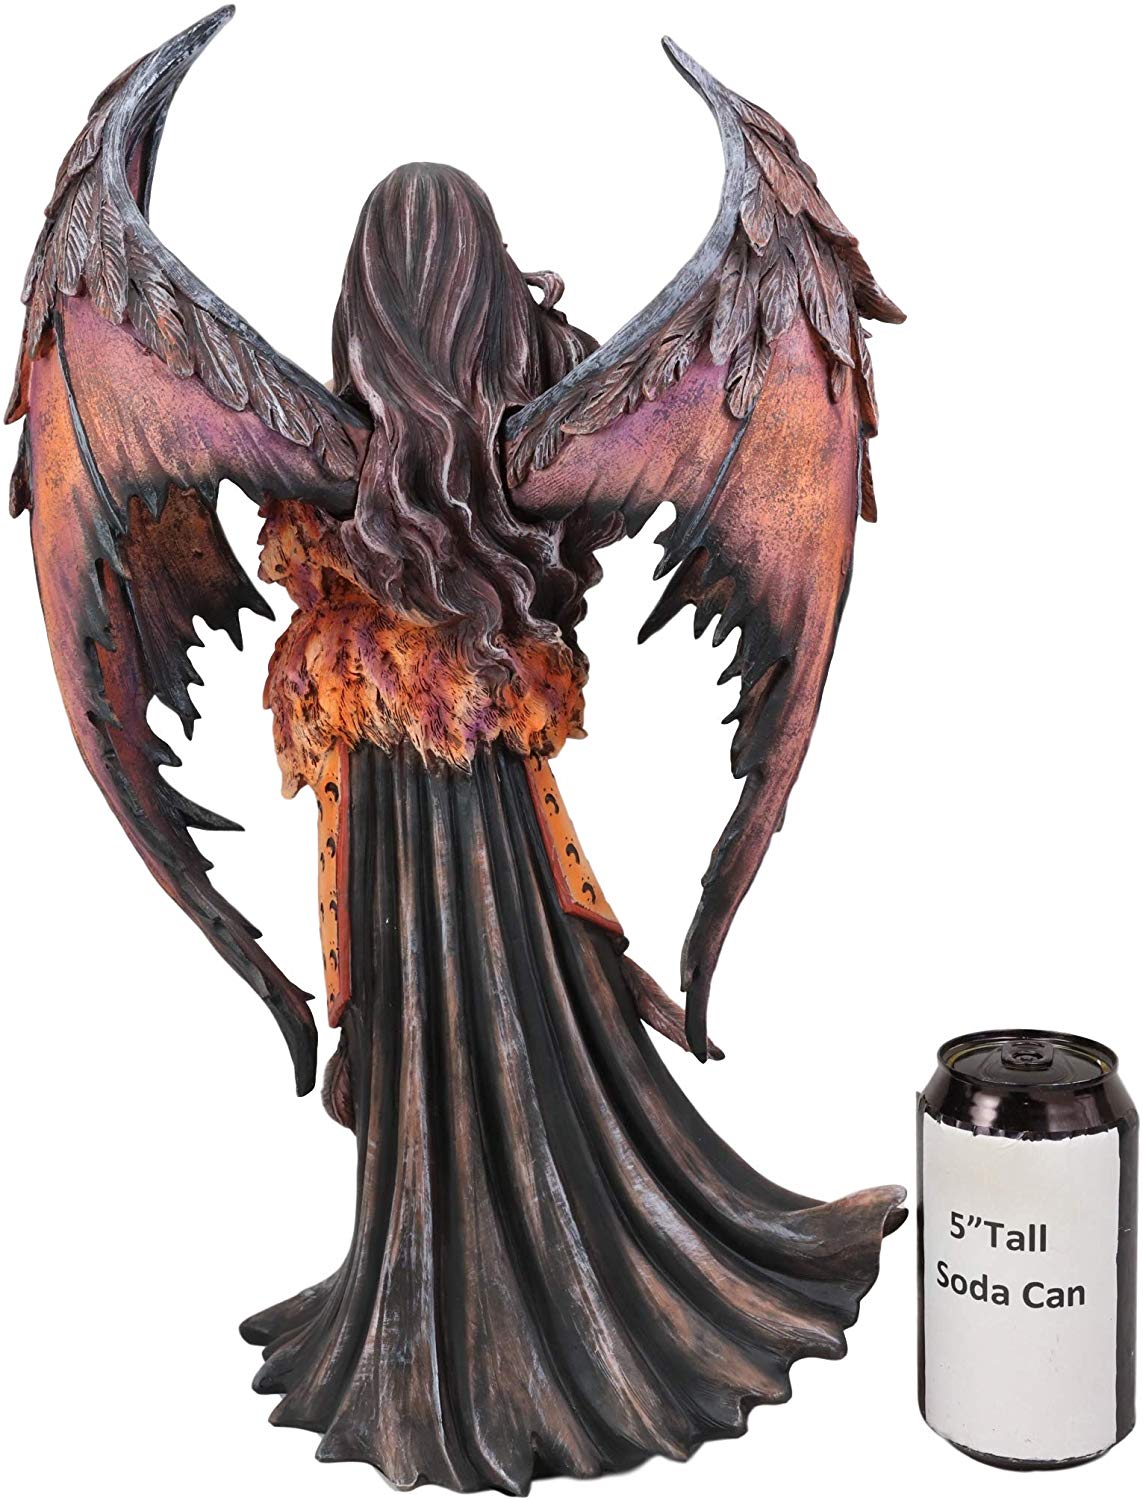 Ebros Amy Brown Large Gothic Autumn Fall Fire Bat Winged Elf Fairy Statue 17"H - image 3 of 4